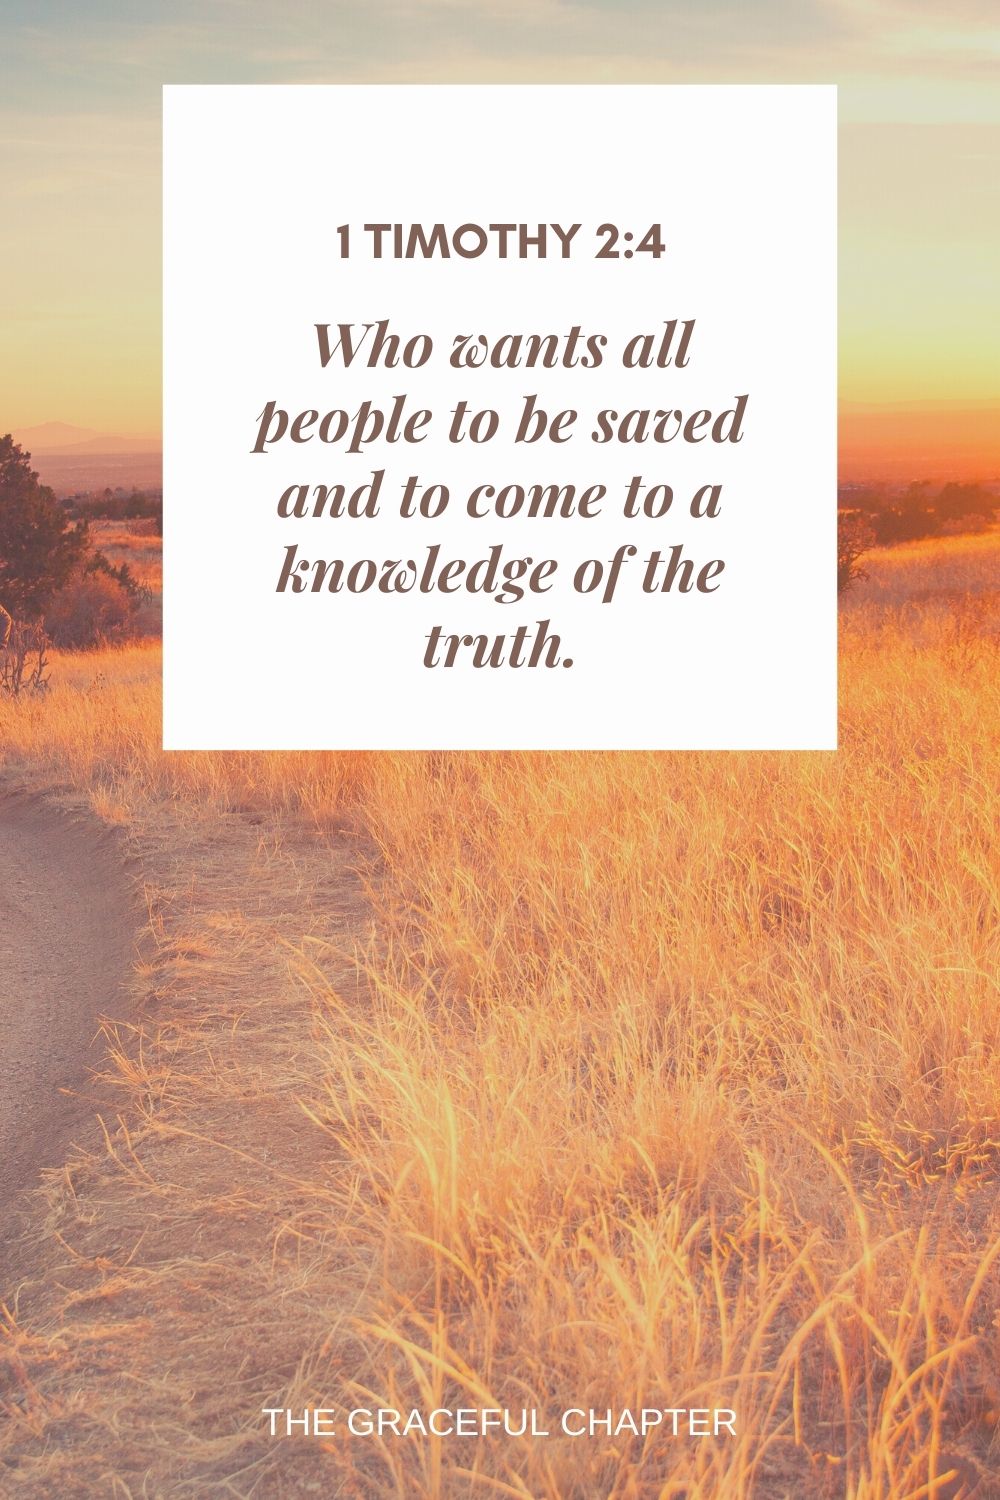 Who wants all people to be saved and to come to a knowledge of the truth. 1 Timothy 2:4